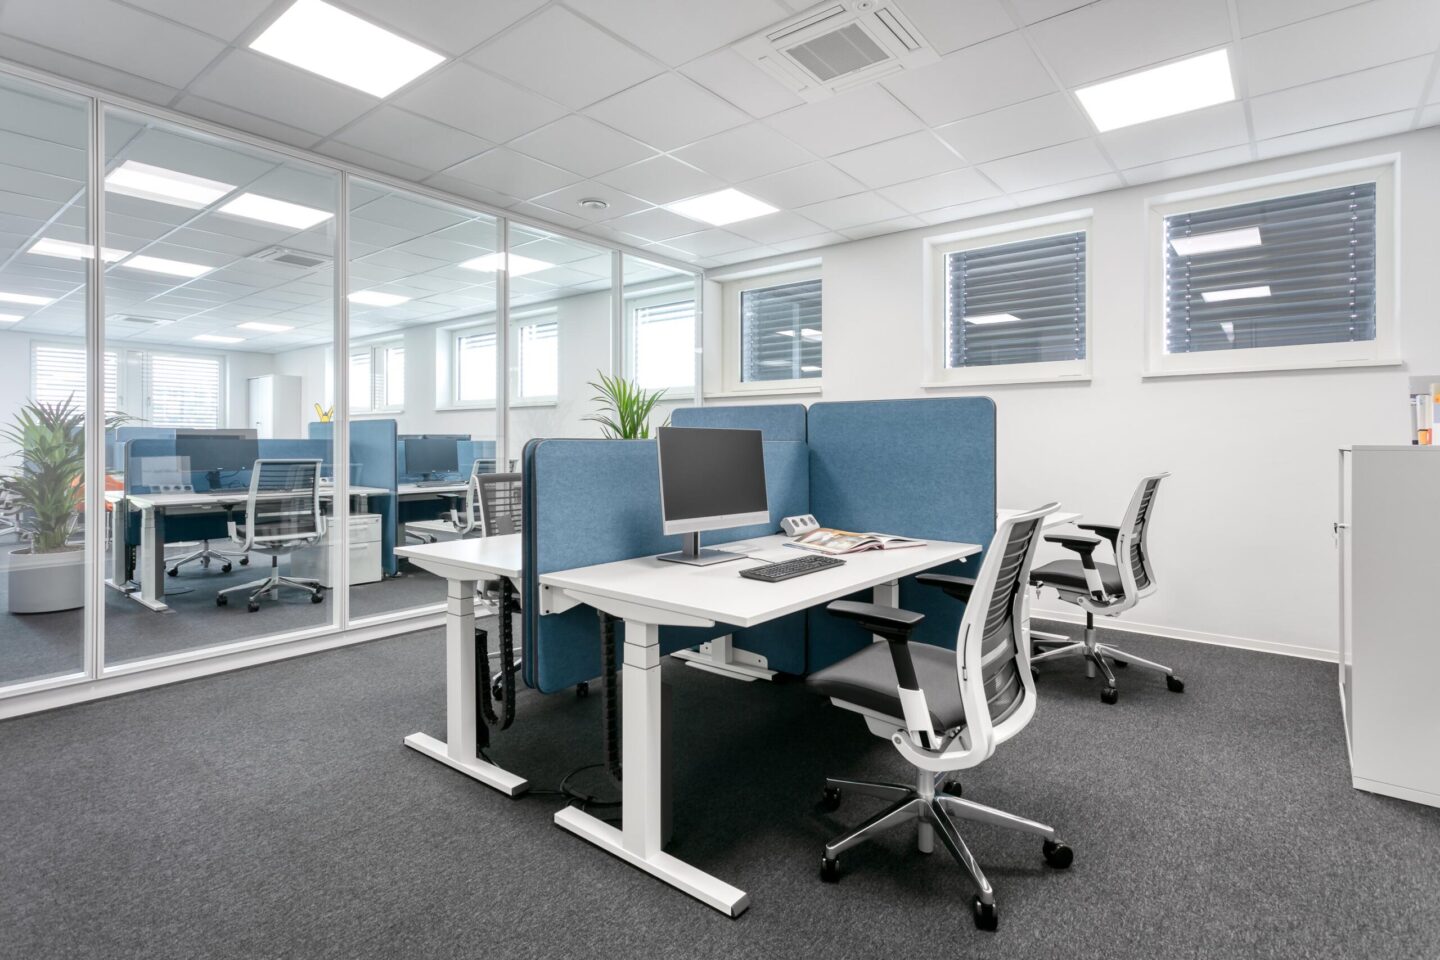 Double workstation from Steelcase │ office swivel chairs, height-adjustable tables │ bright, open and spacious